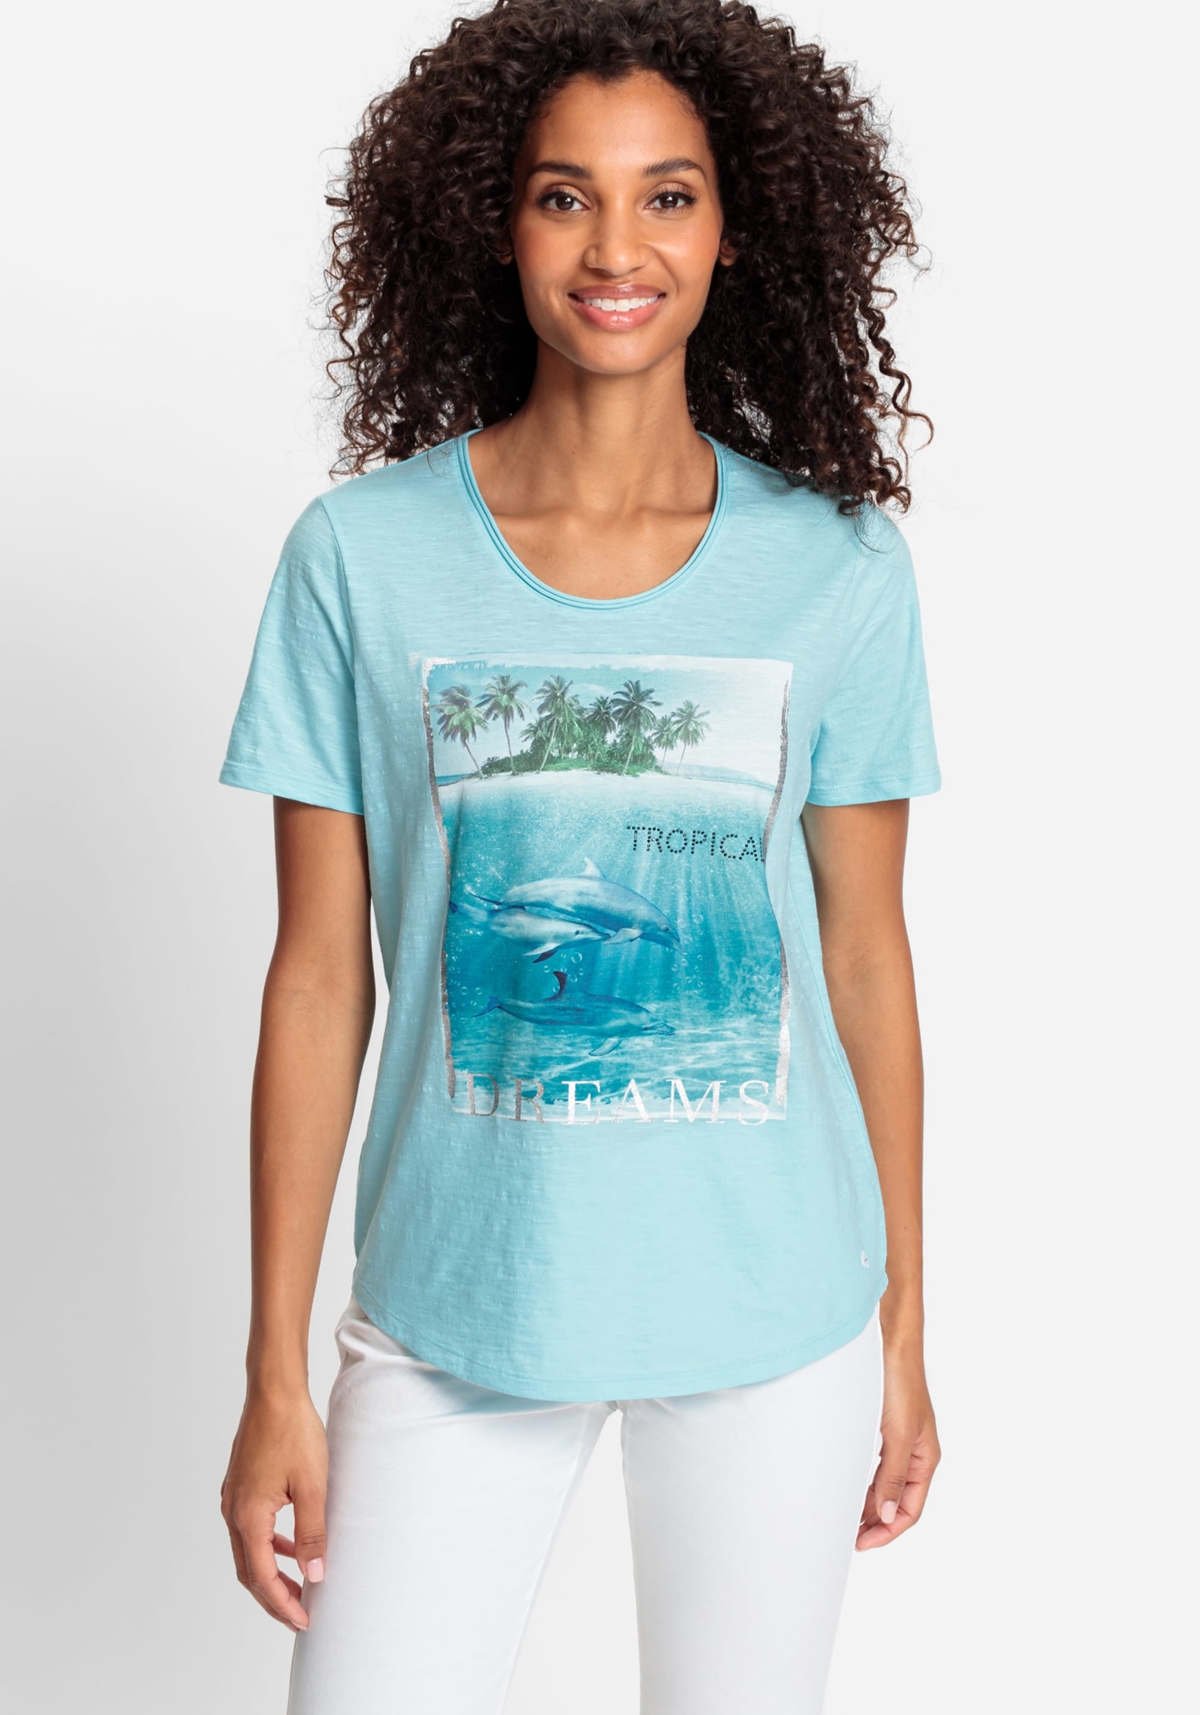 Women's 100% Cotton Short Sleeve Dolphin Placement Print Tee - Light turquoise